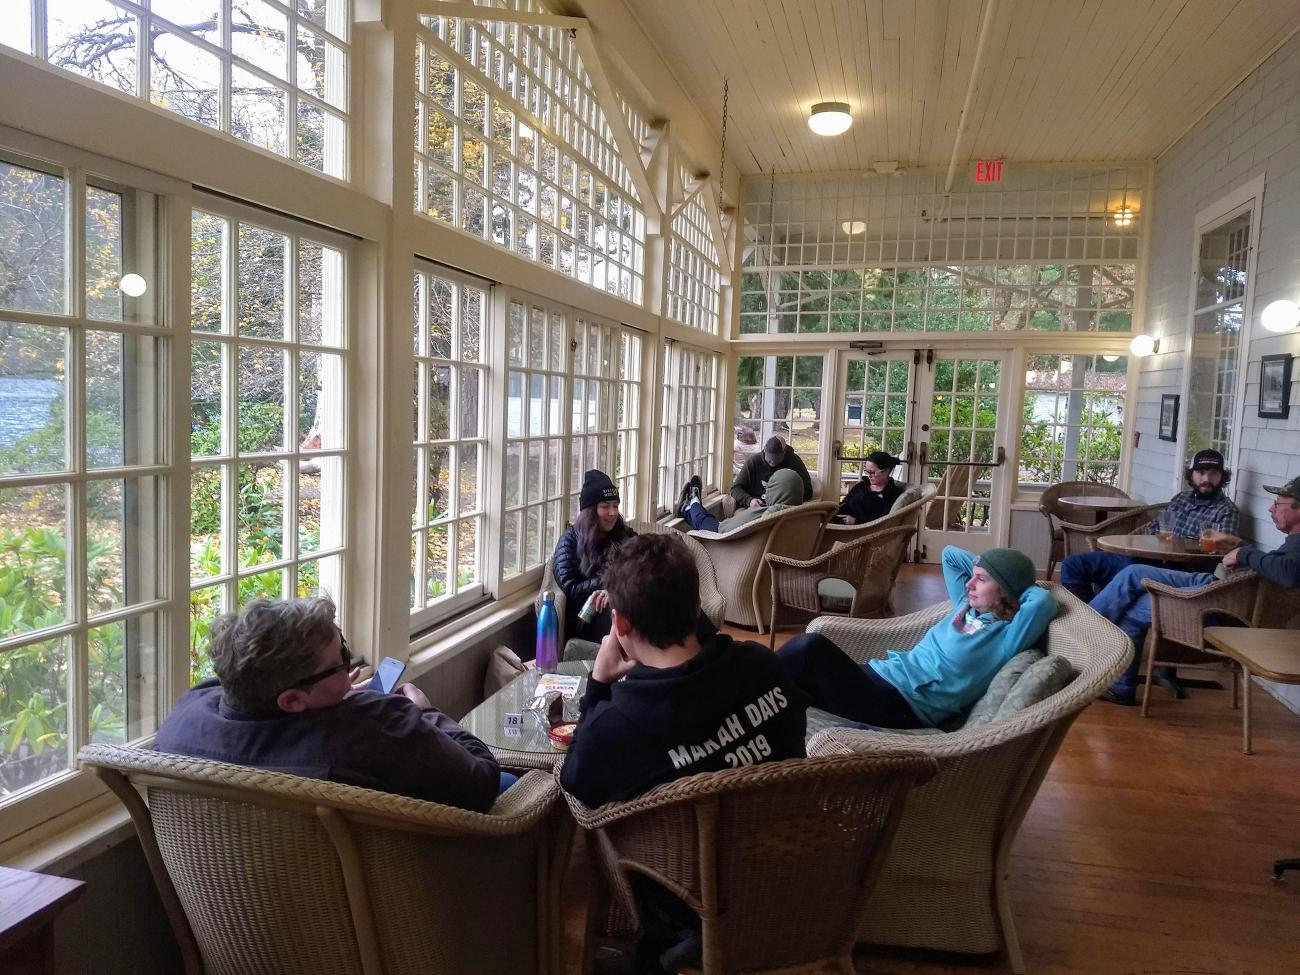 People sit in a sunroom in a historic lodge